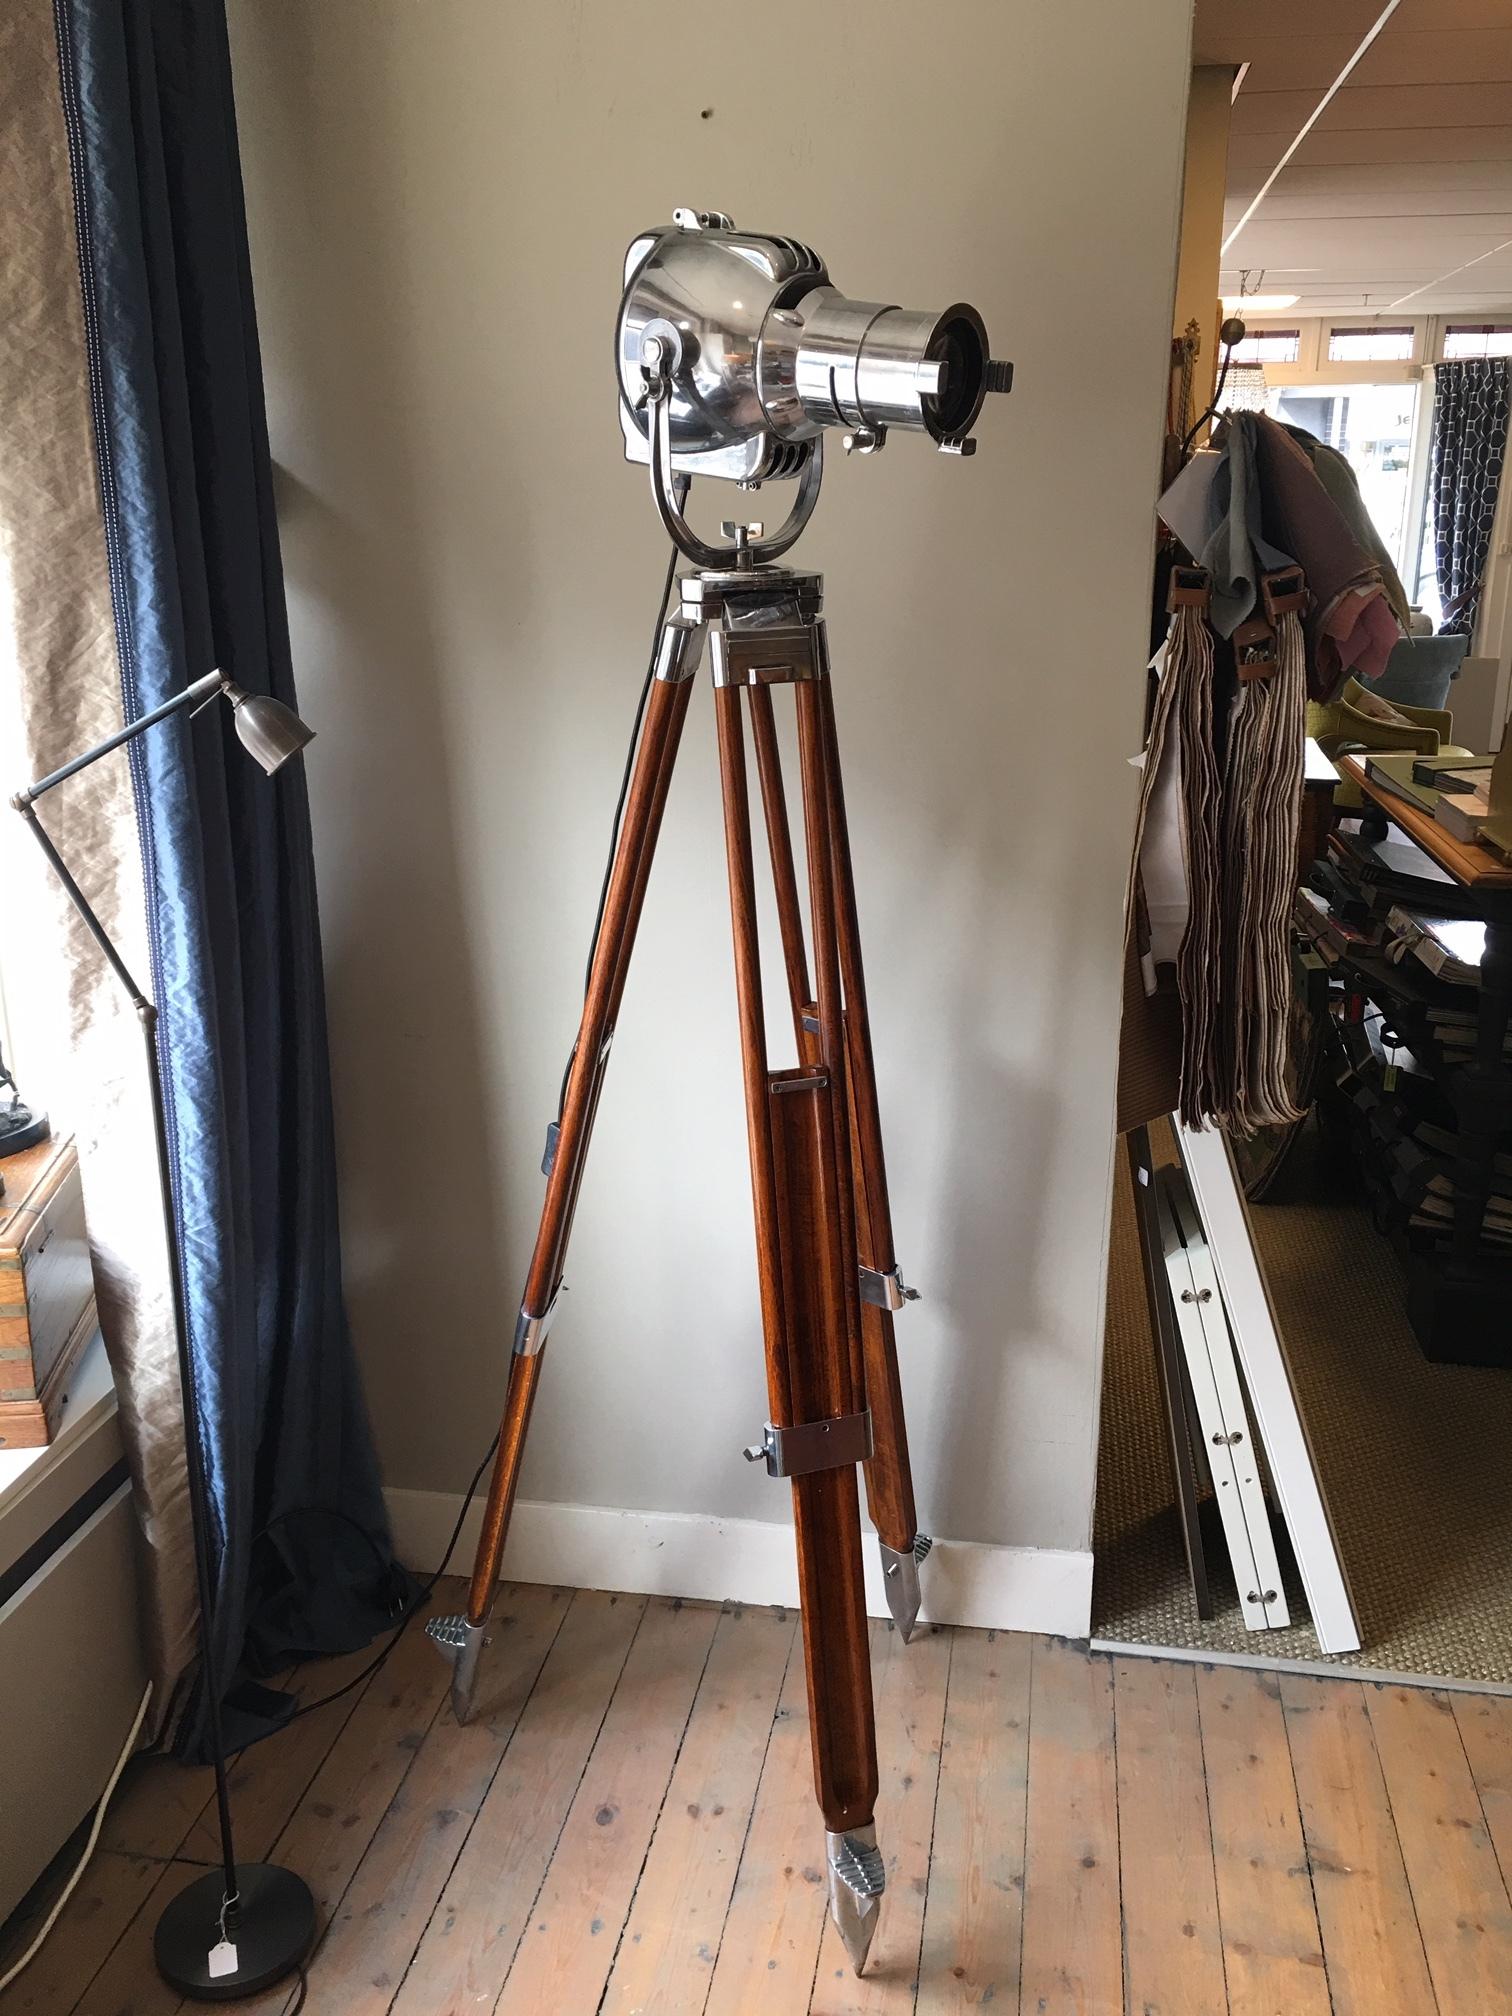 Set of original strand electric theatre lamps on wooden tripods.
In perfect condition, completely polished and rewired.
Adjustable tripods.